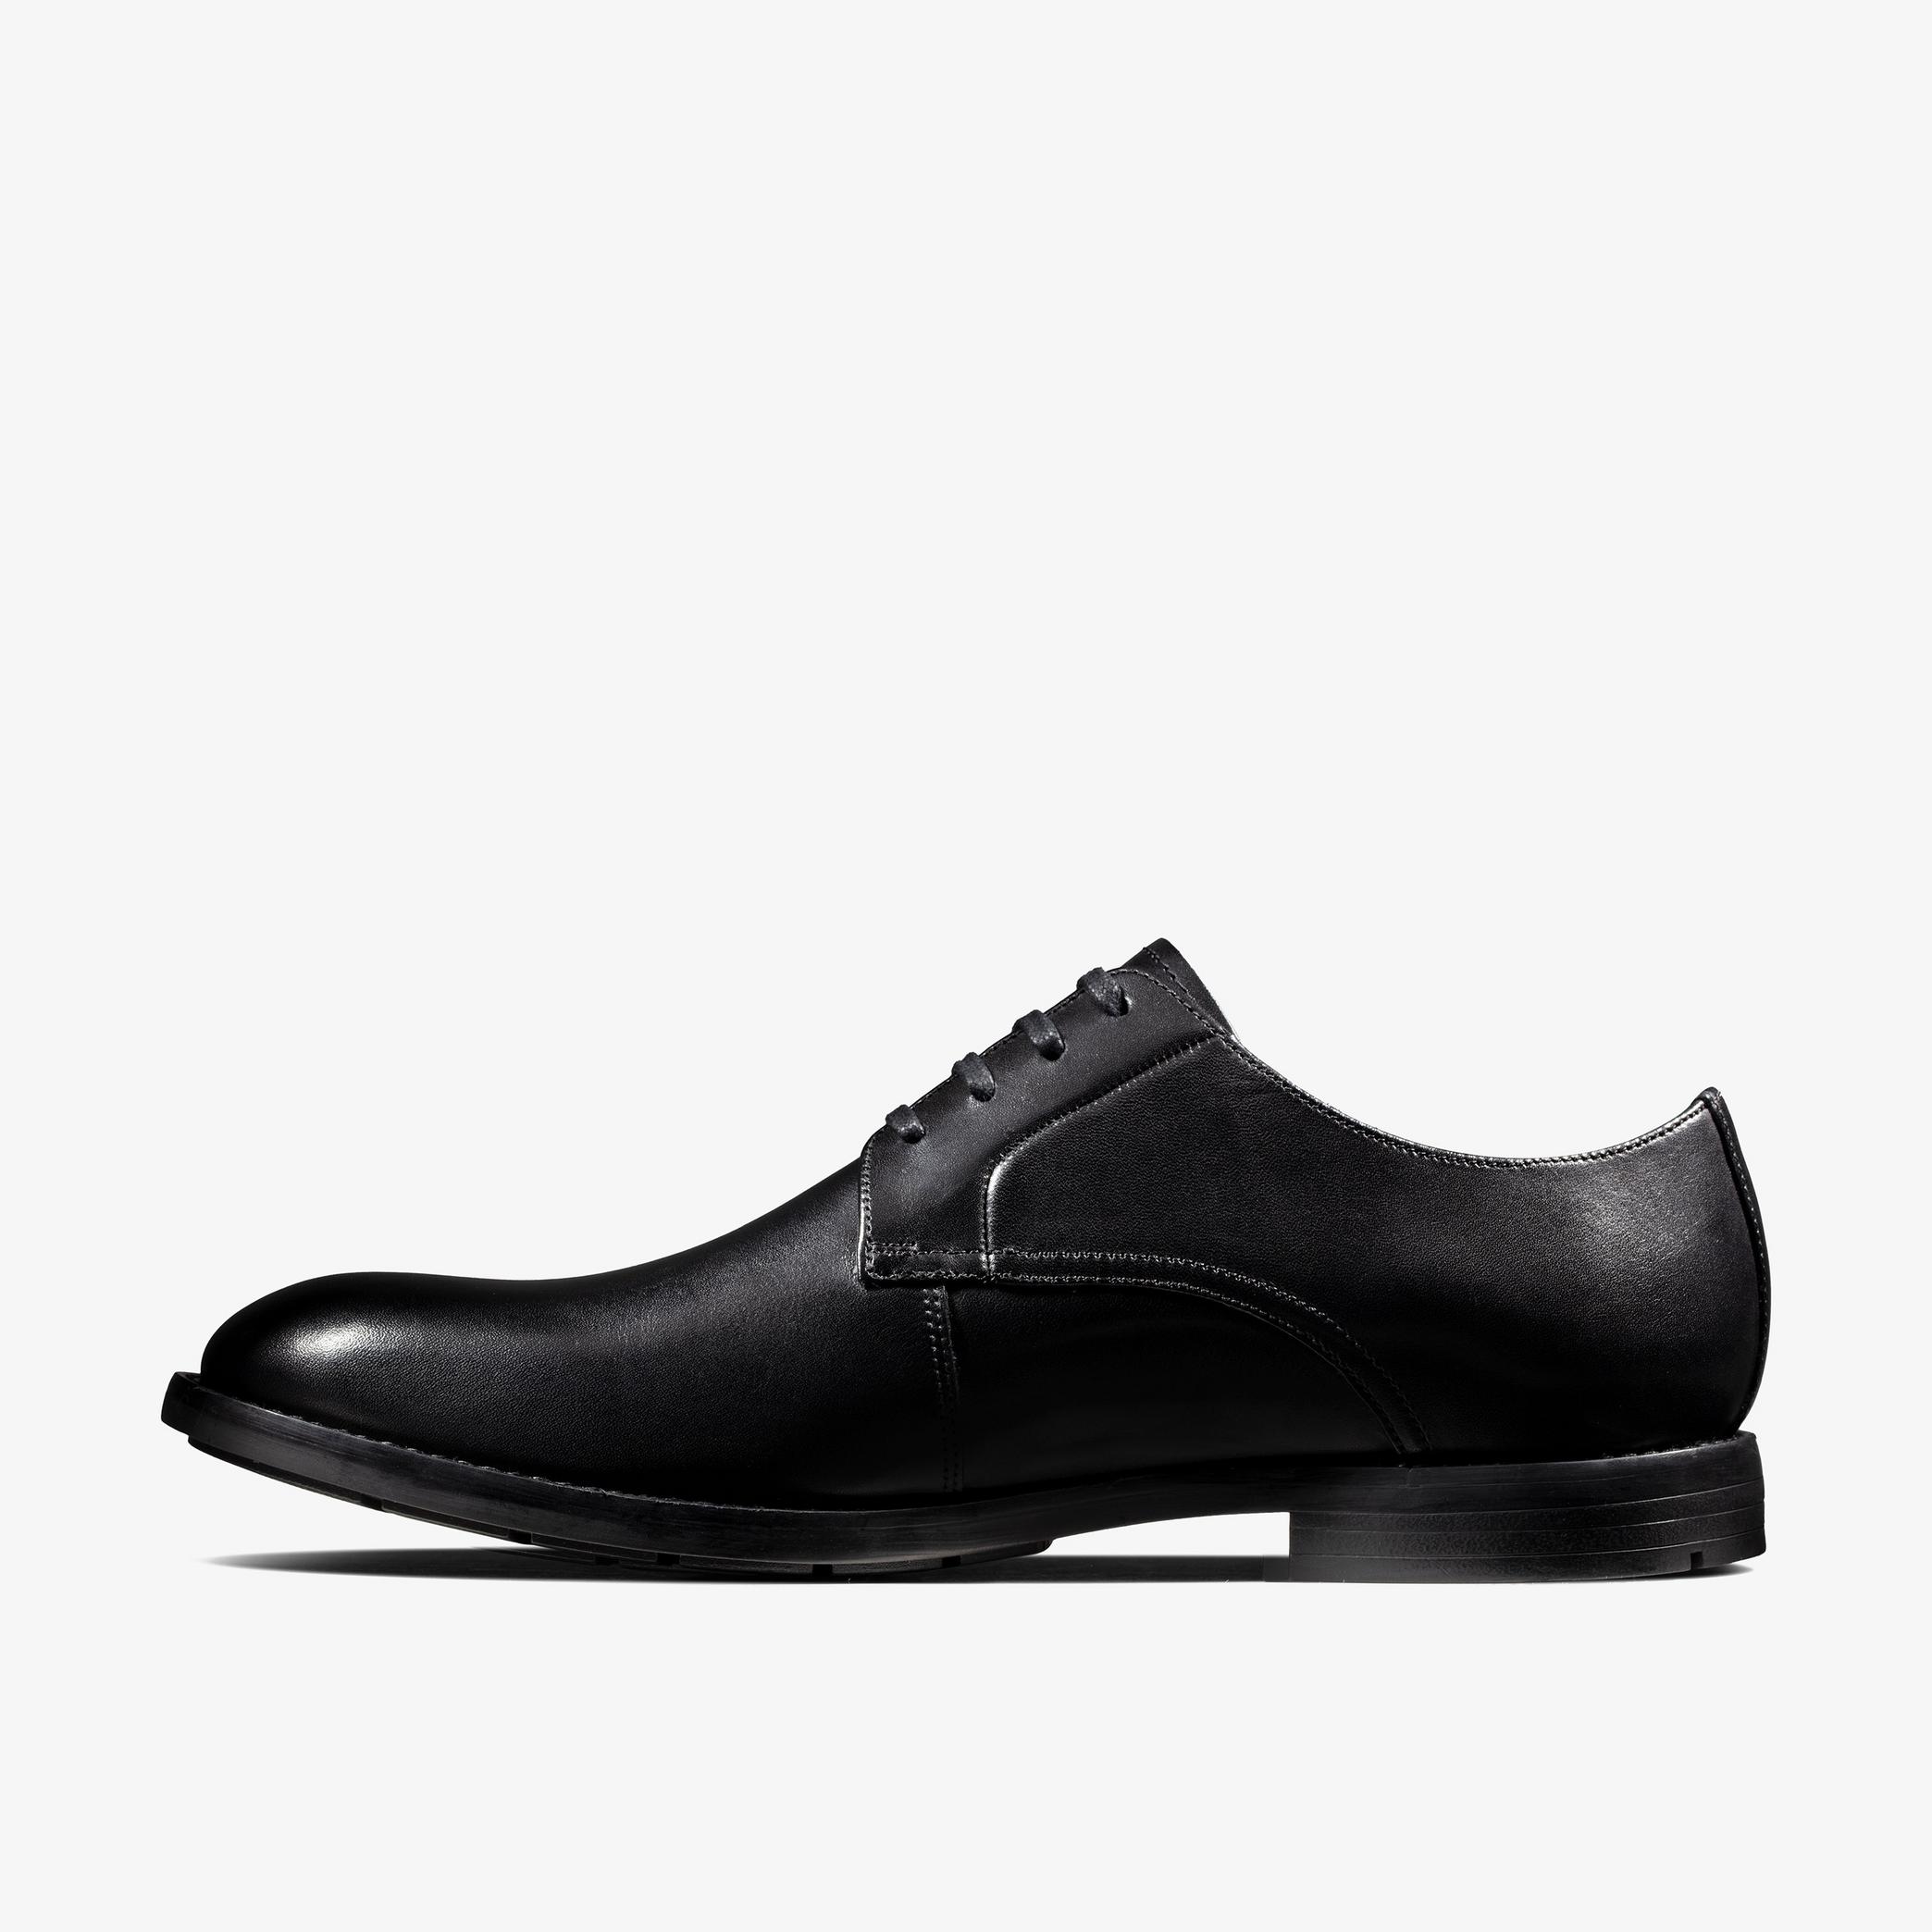 Ronnie Walk GTX Black Leather Derby Shoes, view 2 of 6